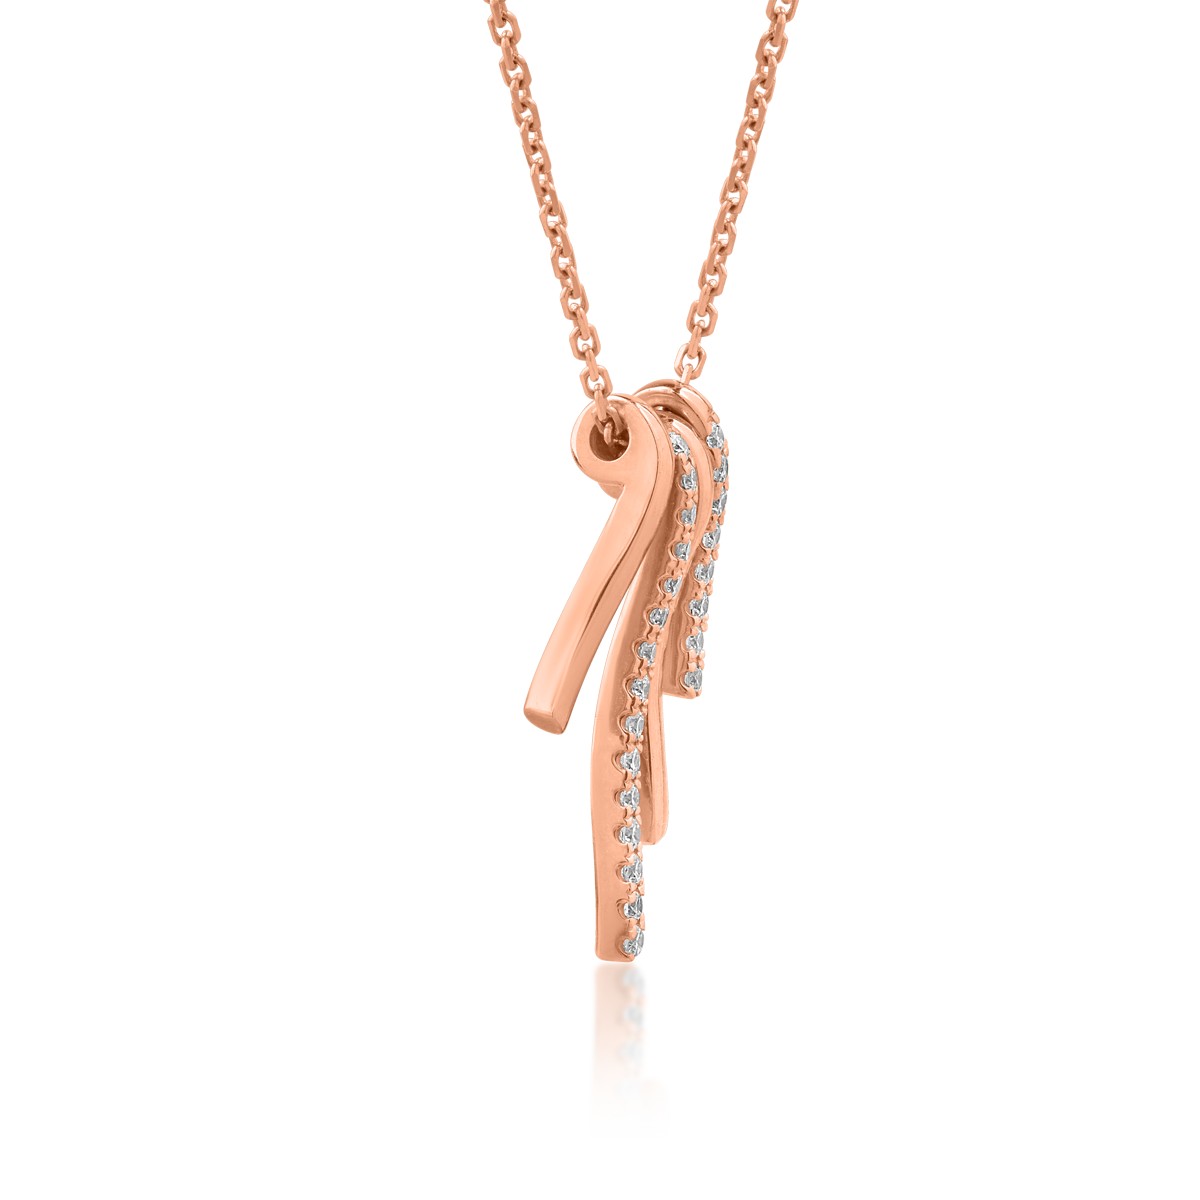 18K rose gold pendant necklace with 0.093ct diamonds